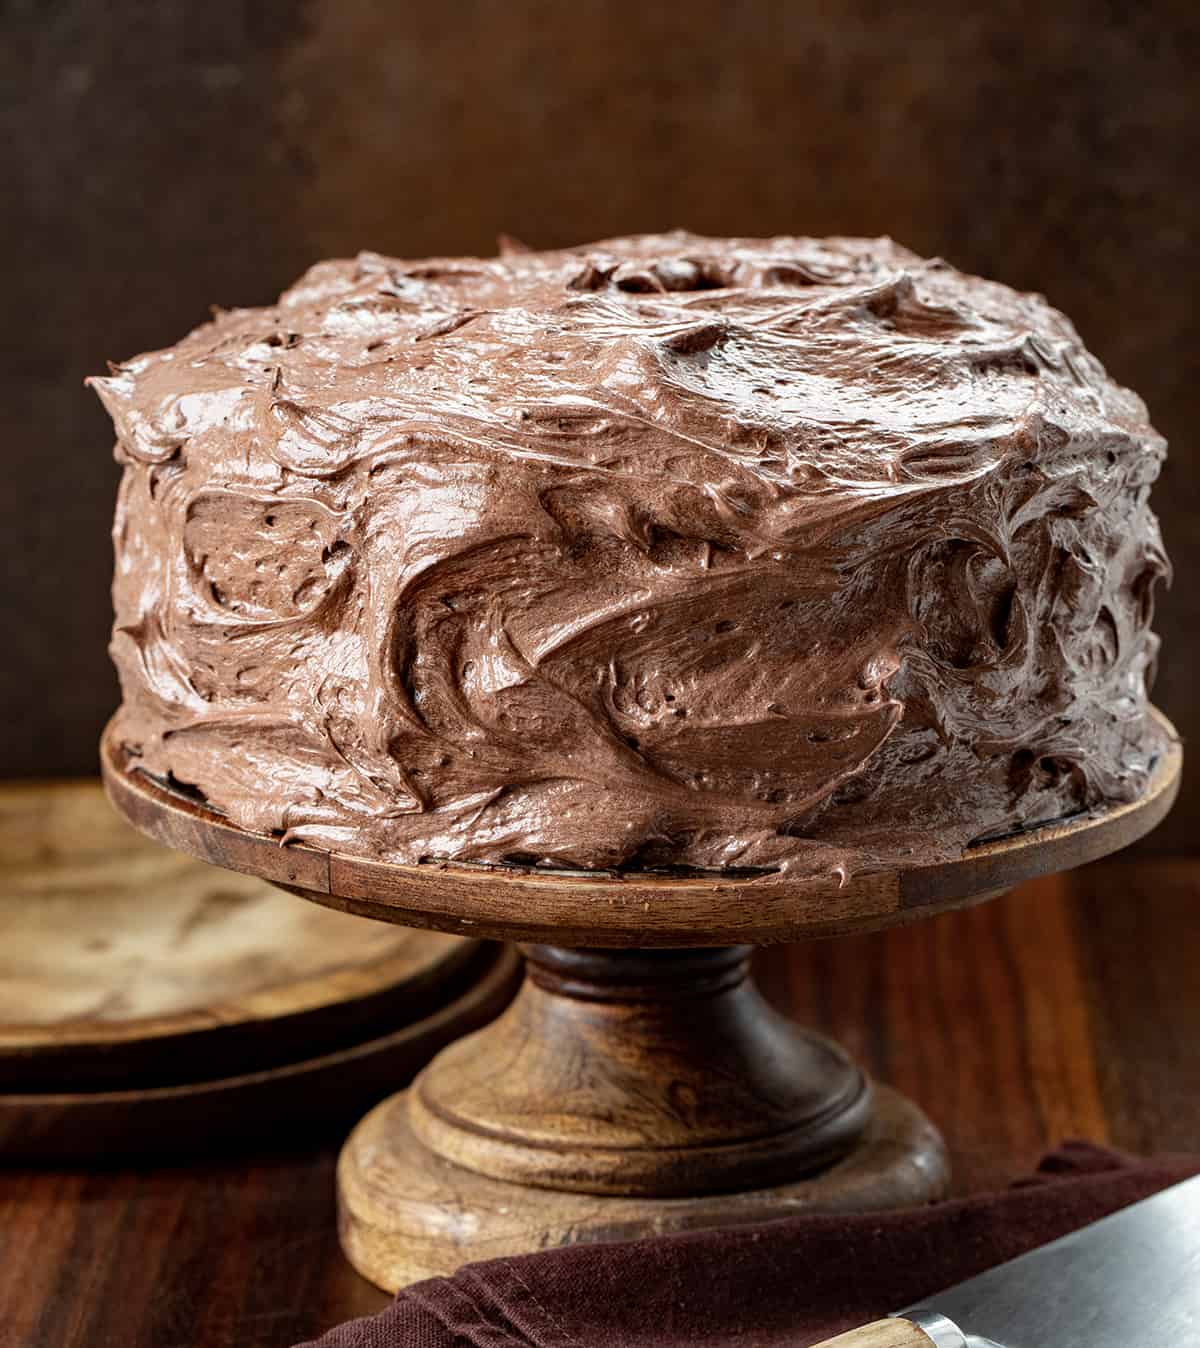 Cake on a Wooden Cake stand Covered in Chocolate Ermine Frosting.